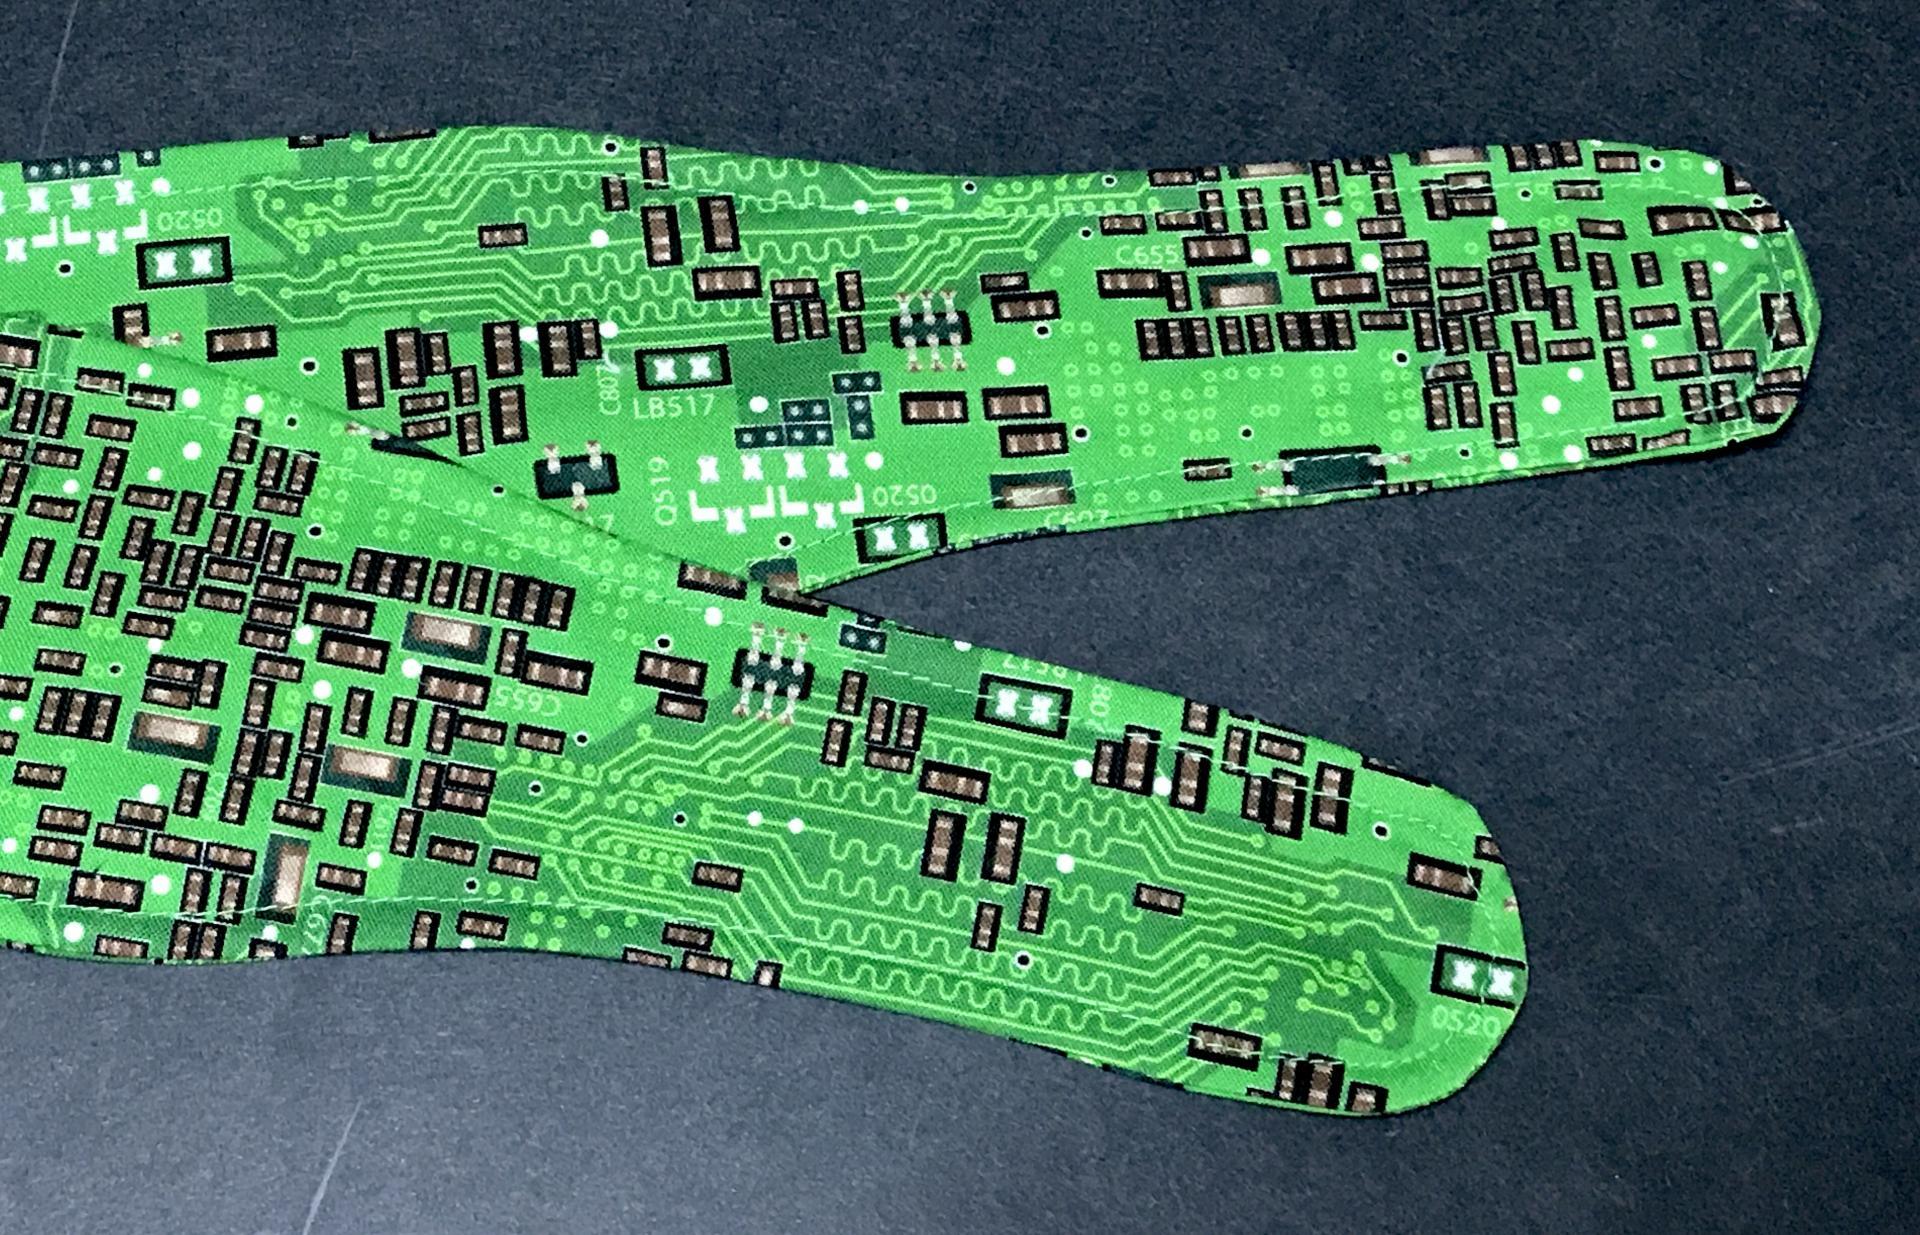 3" Wide green printed circuit board fabric head scarf, showing tapered ends